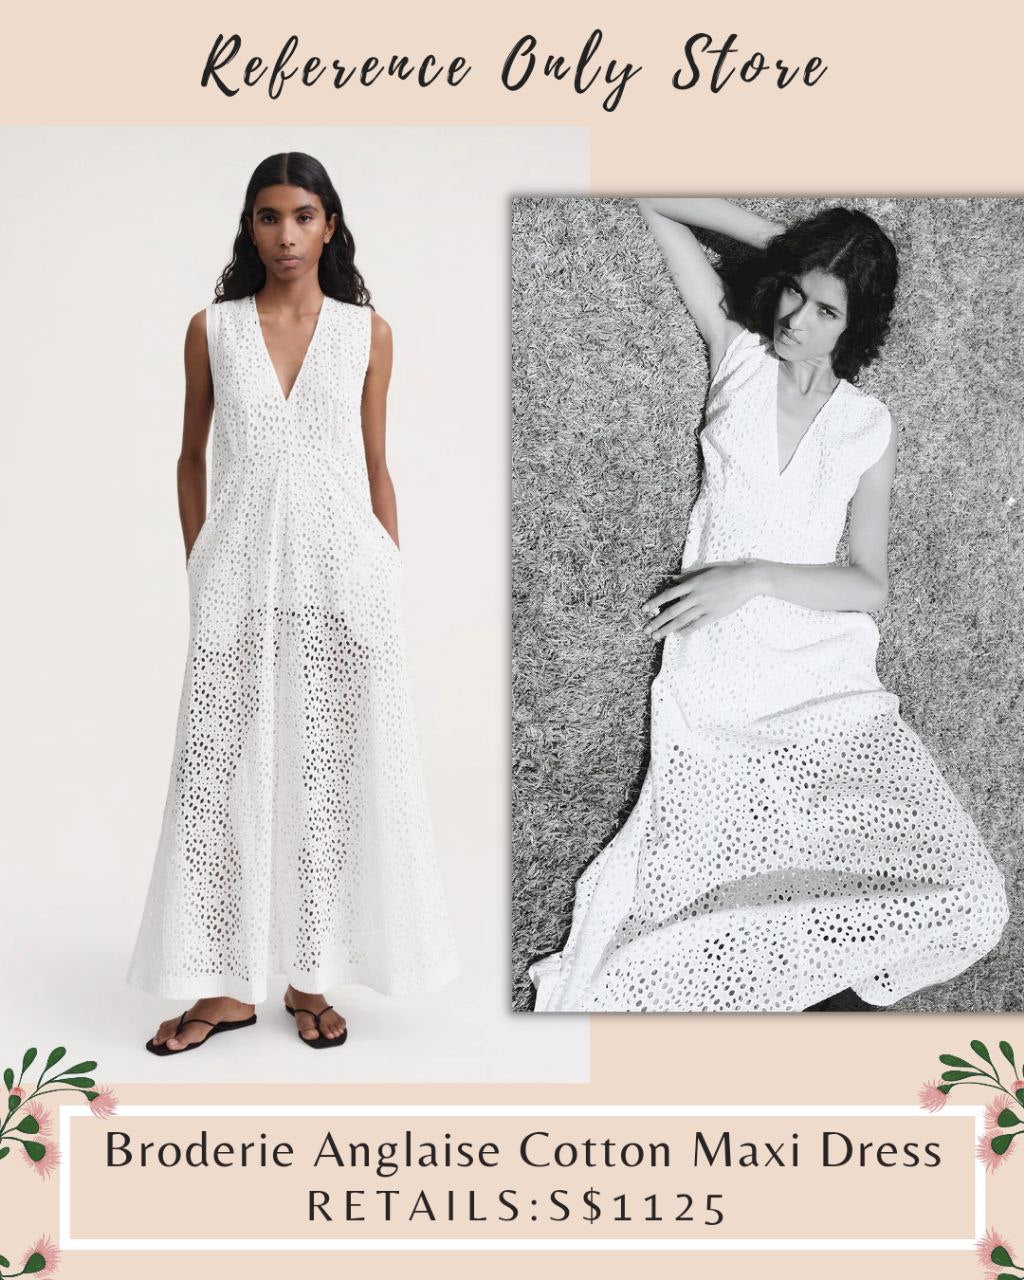 Tot Broderie Anglaise Cotton Ivory Cotton Maxi dress